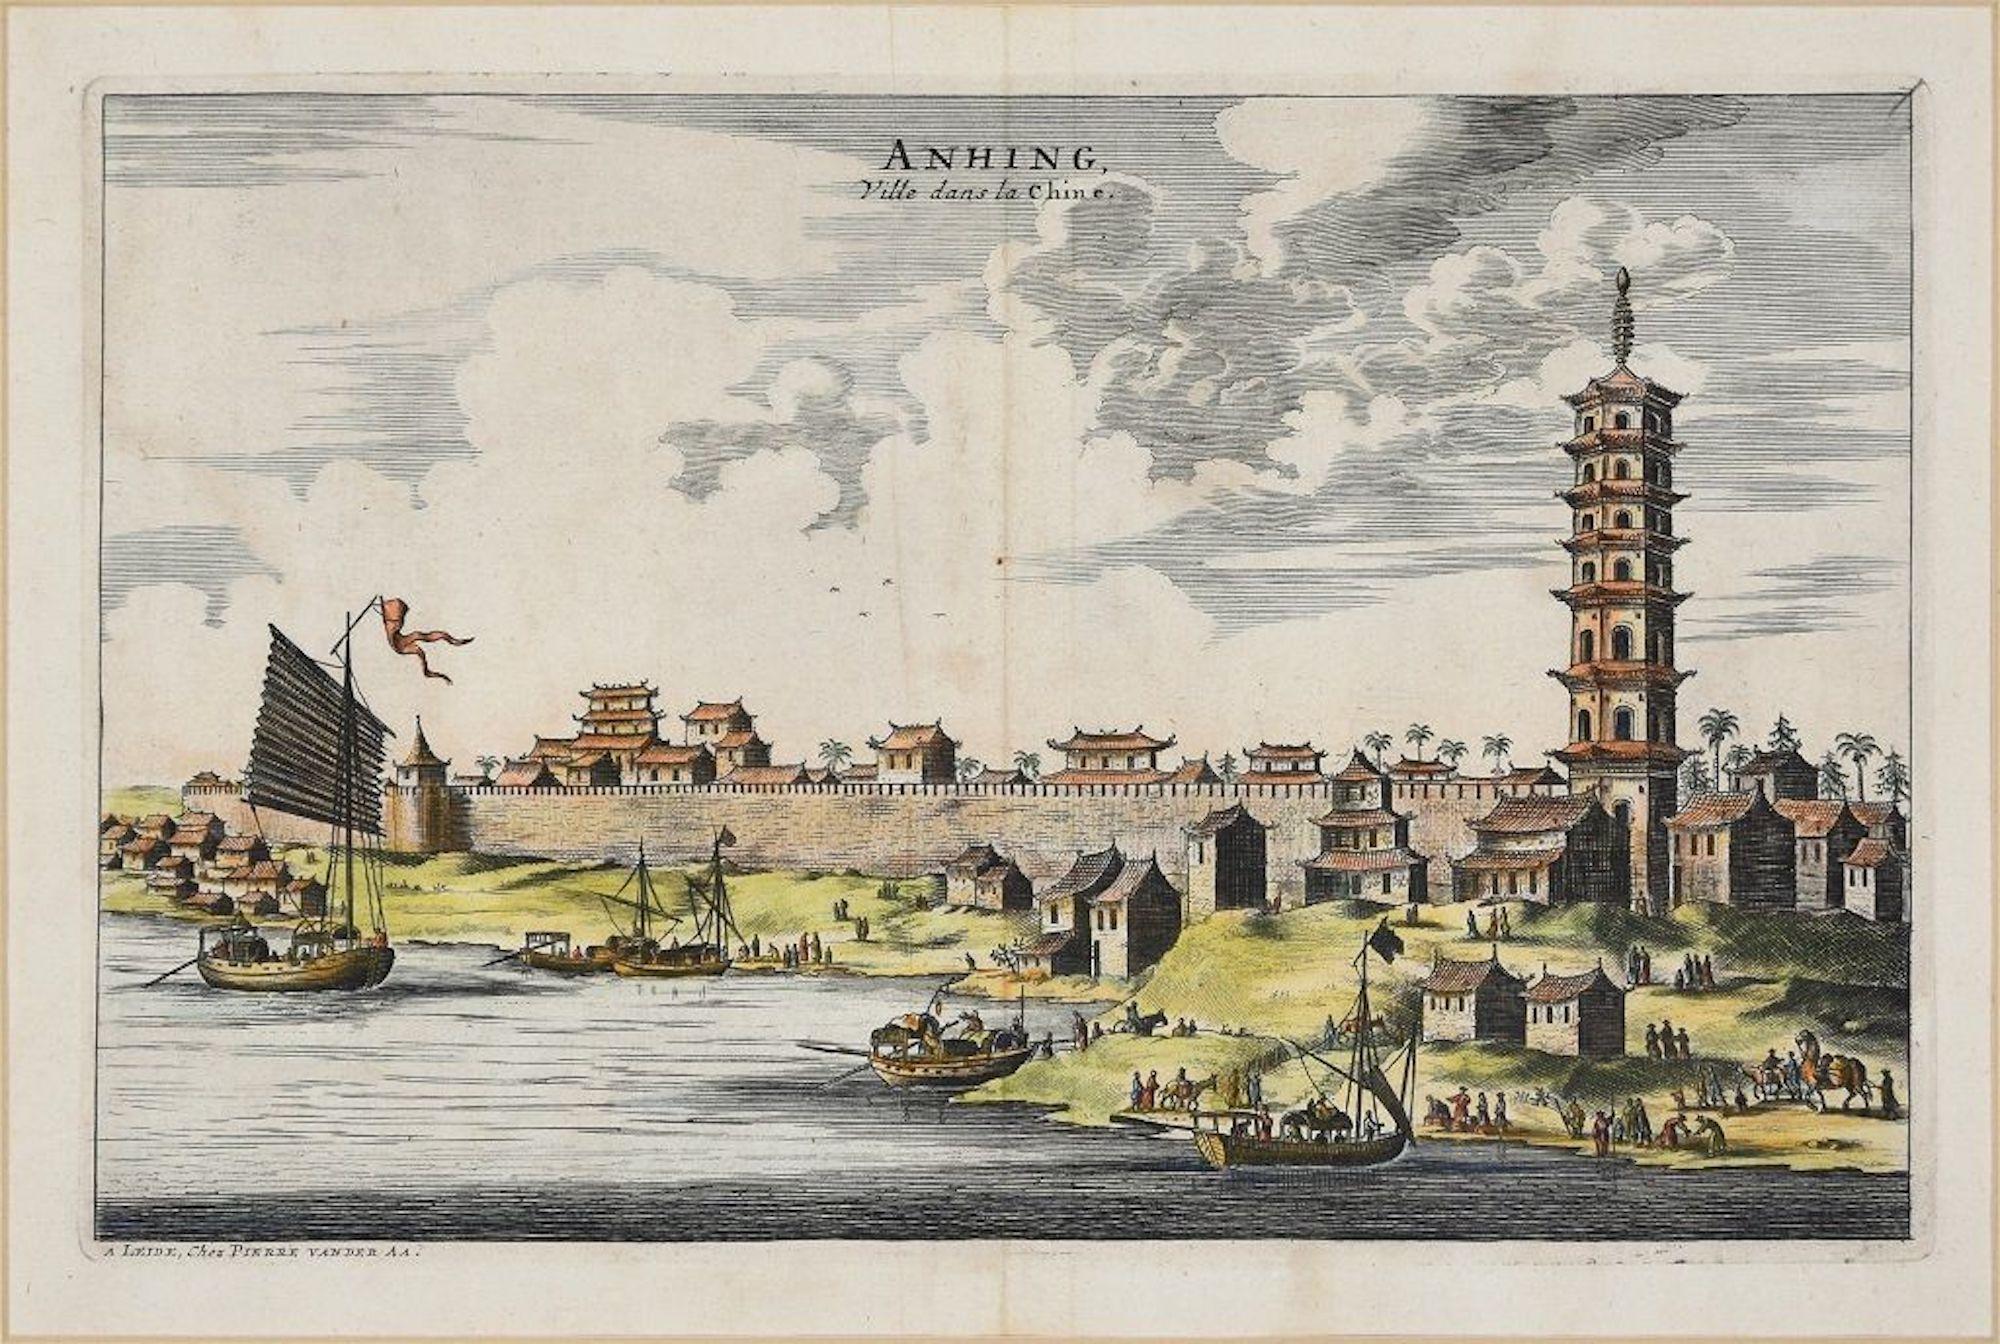 Pieter Van Der Aa Landscape Print - View Of Anning - Original Hand Watercolored Etching by A. Leide